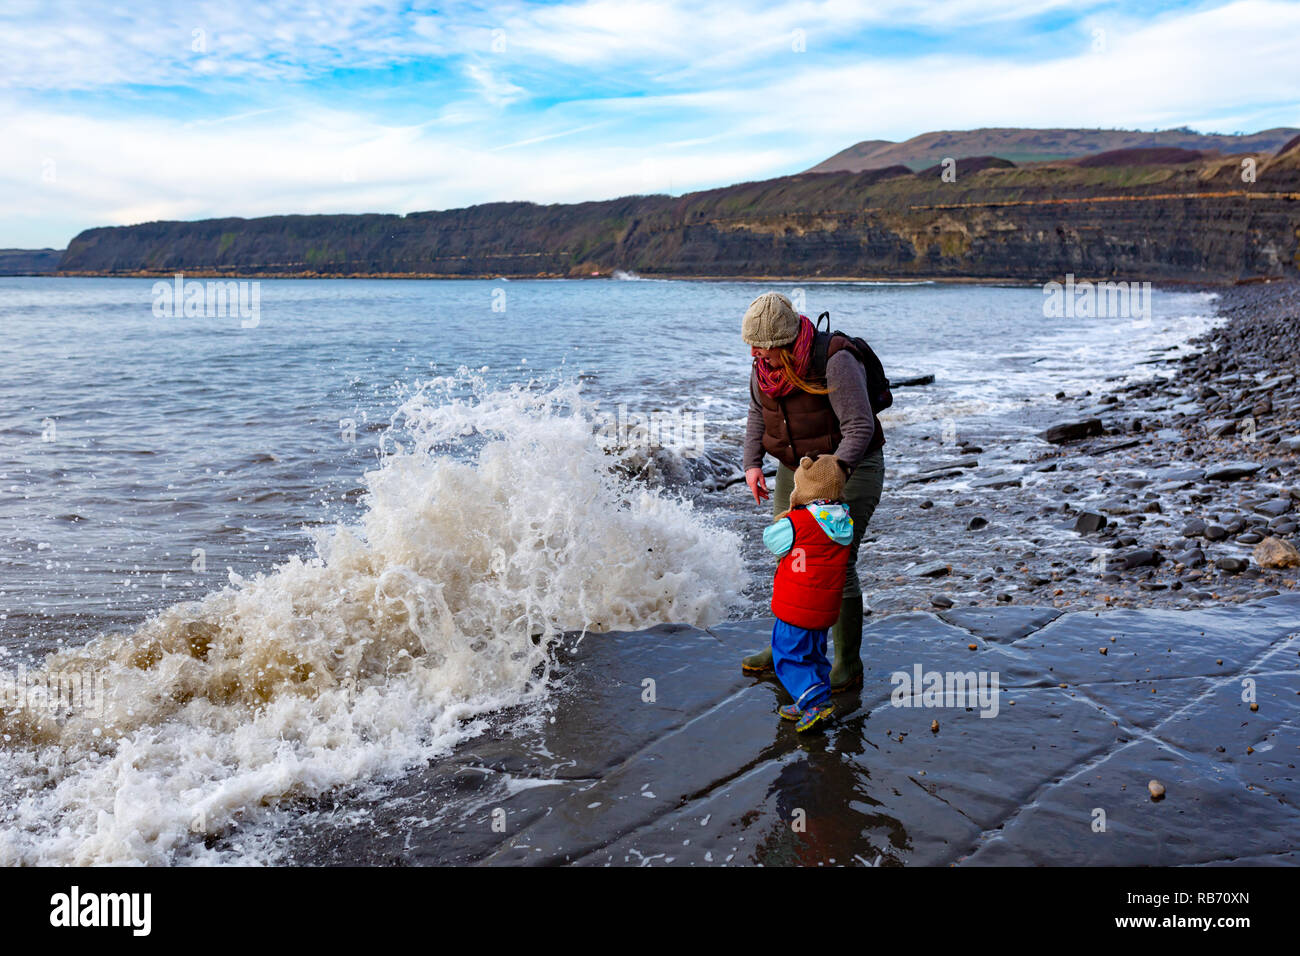 Candid portrait photograph of Parent and young girl standing on coastal ledge getting dredged by crashing waves on Kimmeridge beach, Dorset. Stock Photo